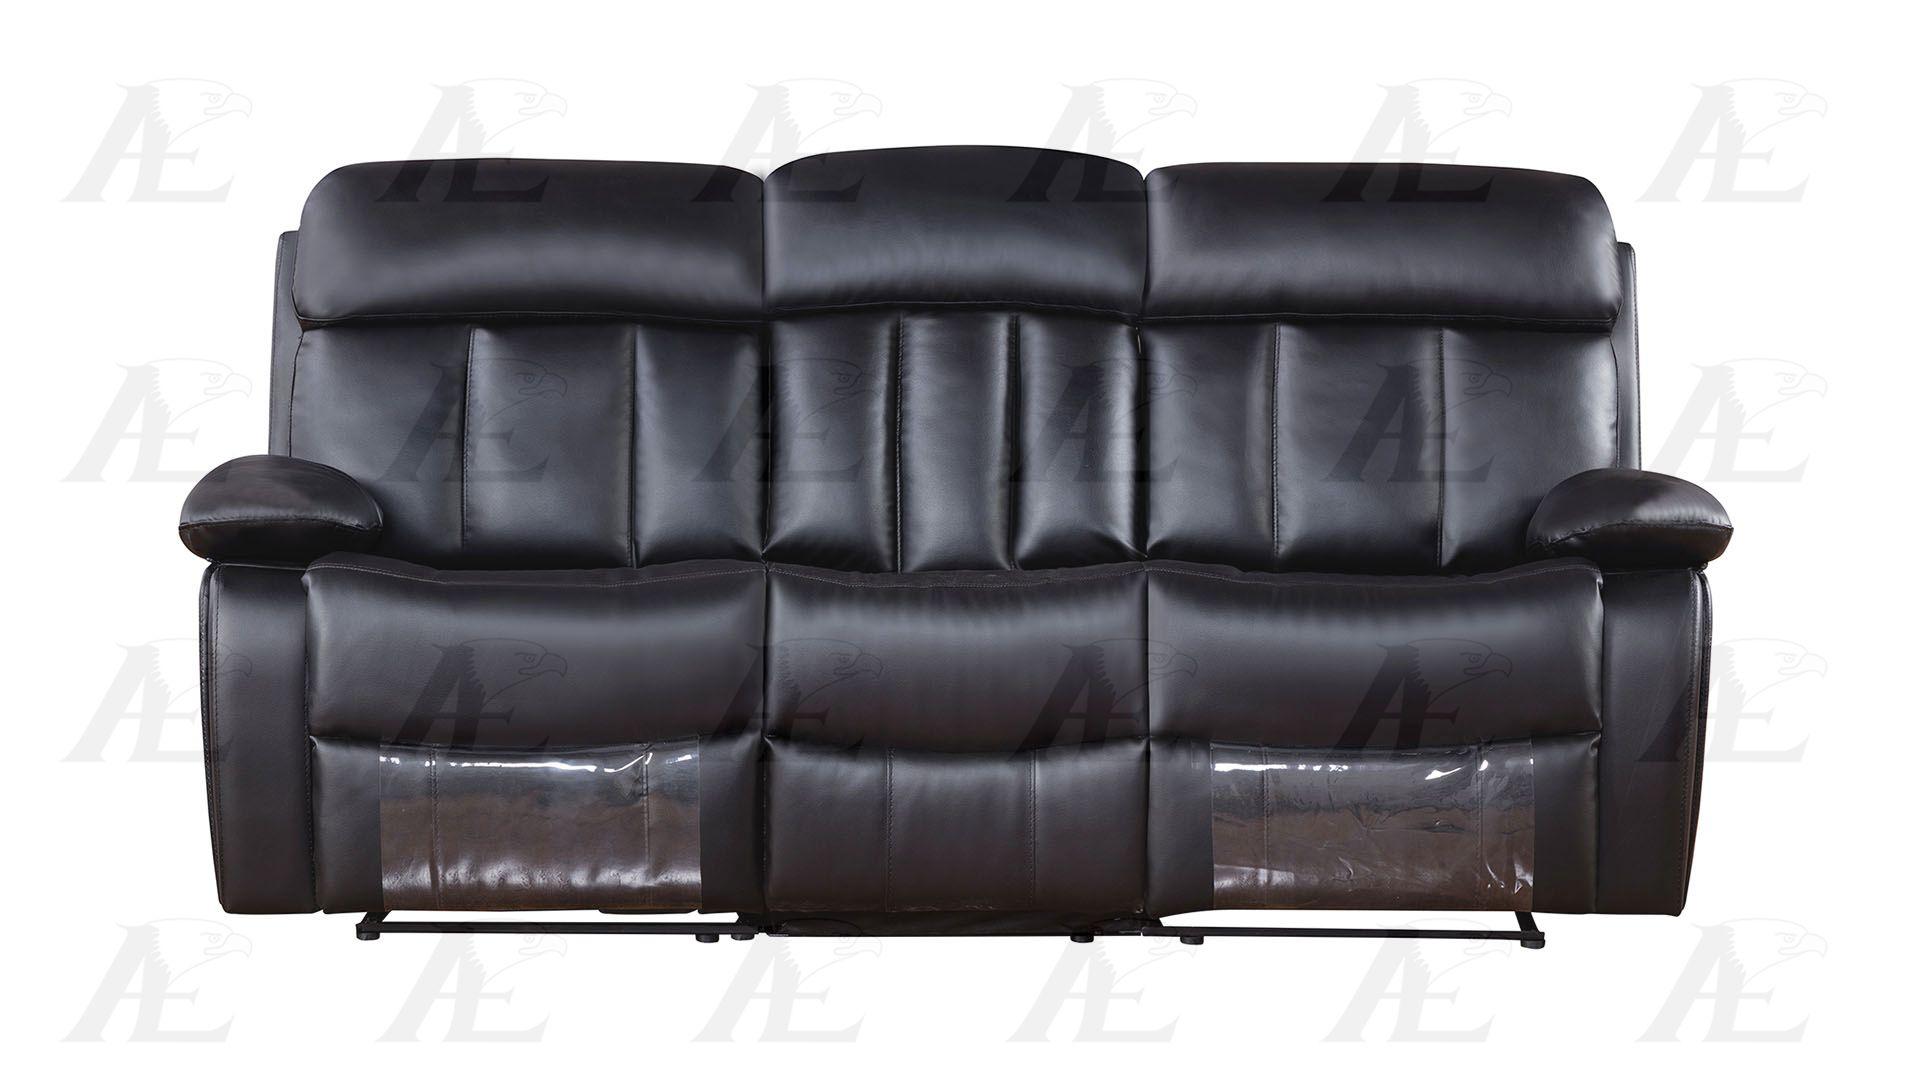 

    
American Eagle Furniture AE-D825-BK Black  Recliner Sofa  Loveseat and Chair Set Bonded Leather 3Pcs Modern
